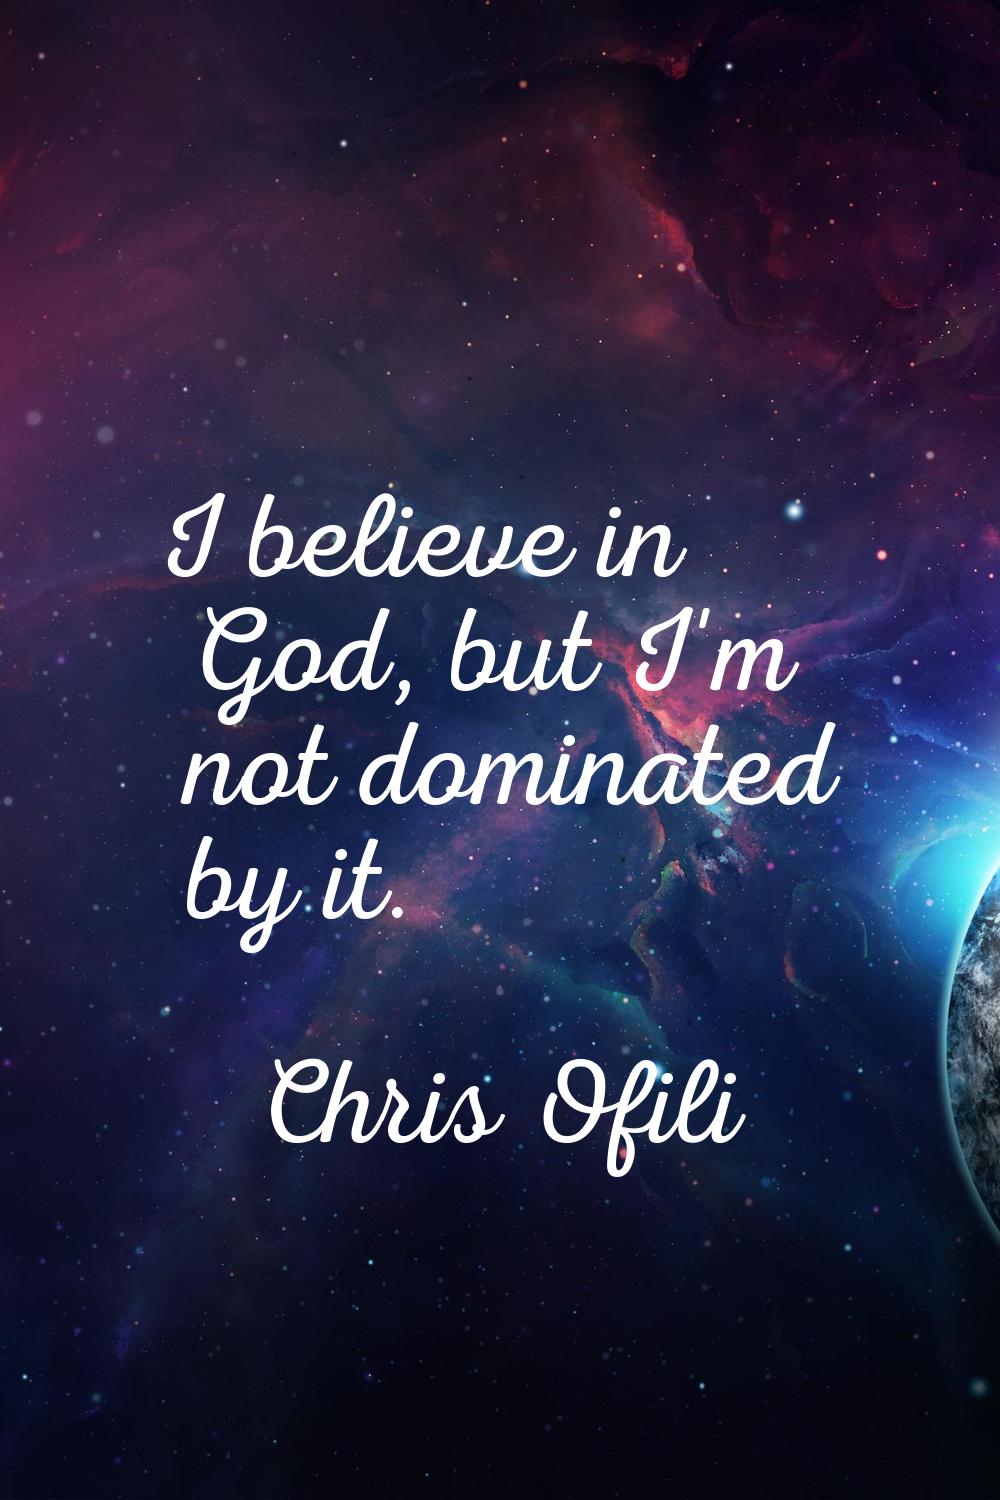 I believe in God, but I'm not dominated by it.